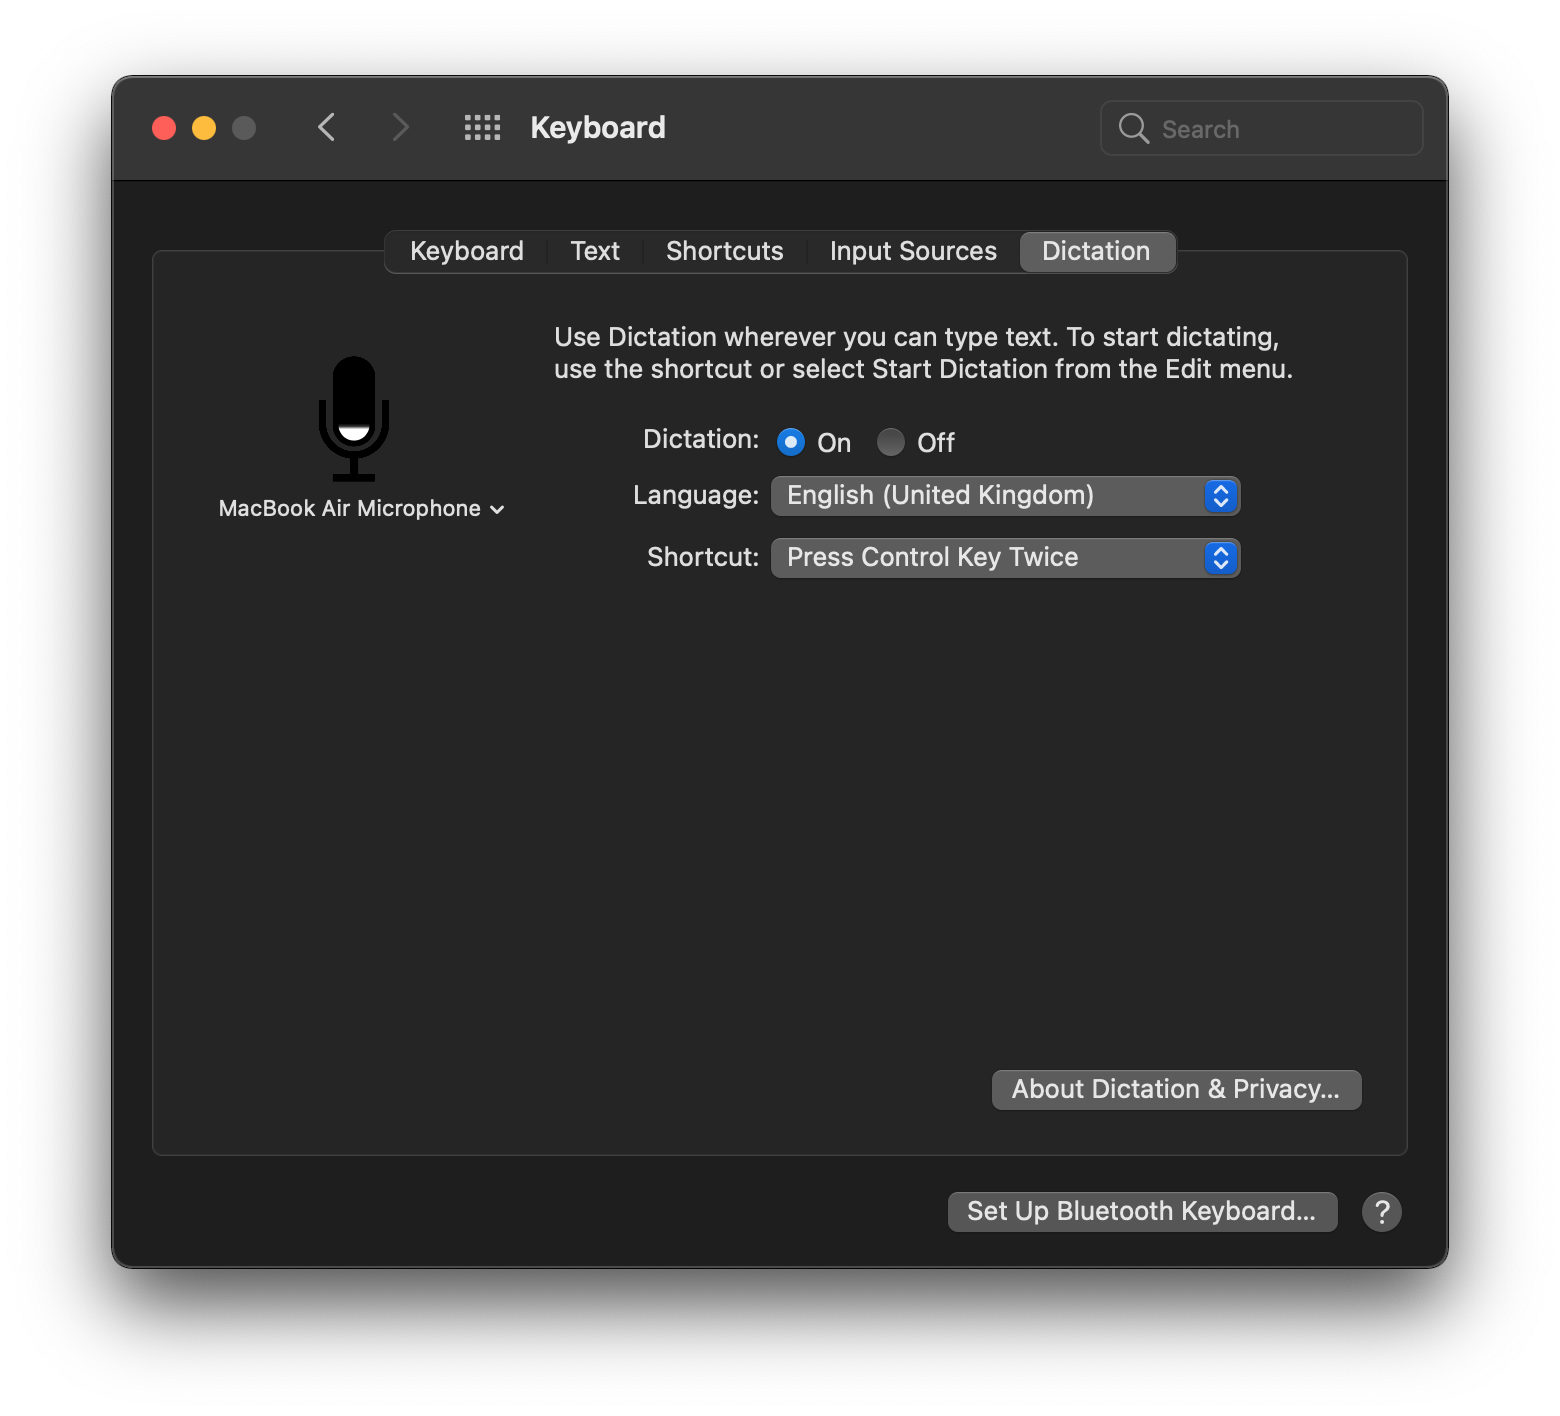 how to turn off enhanced dictation on mac